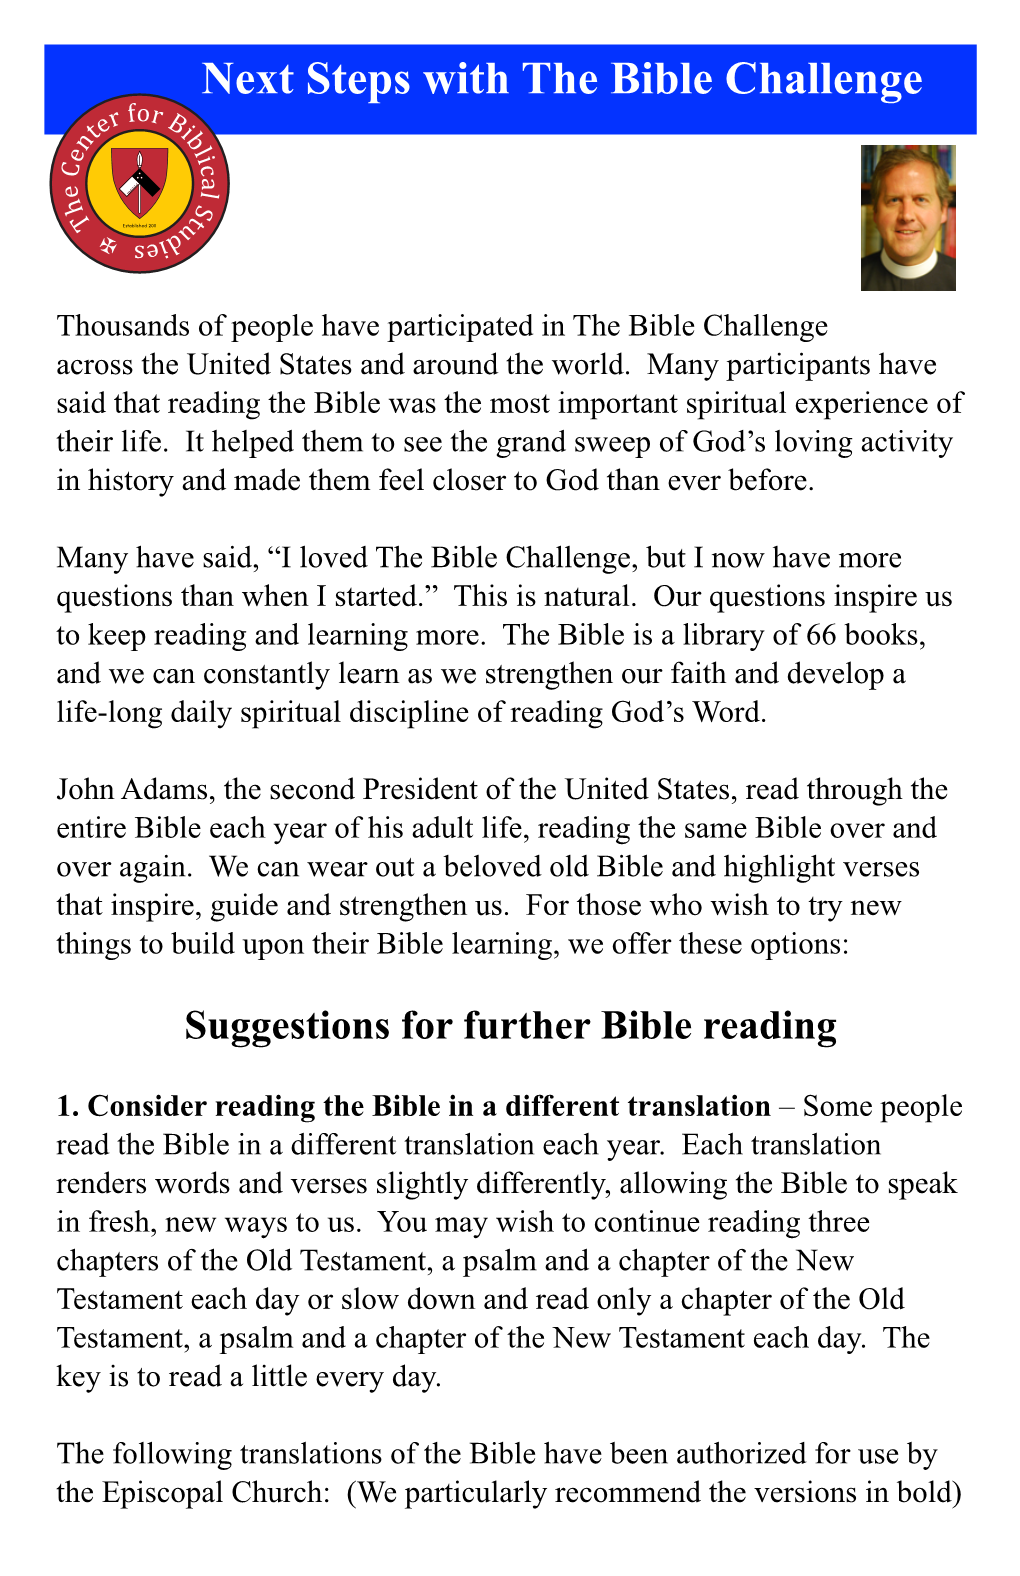 CBS -- Next Steps with the Bible Challenge